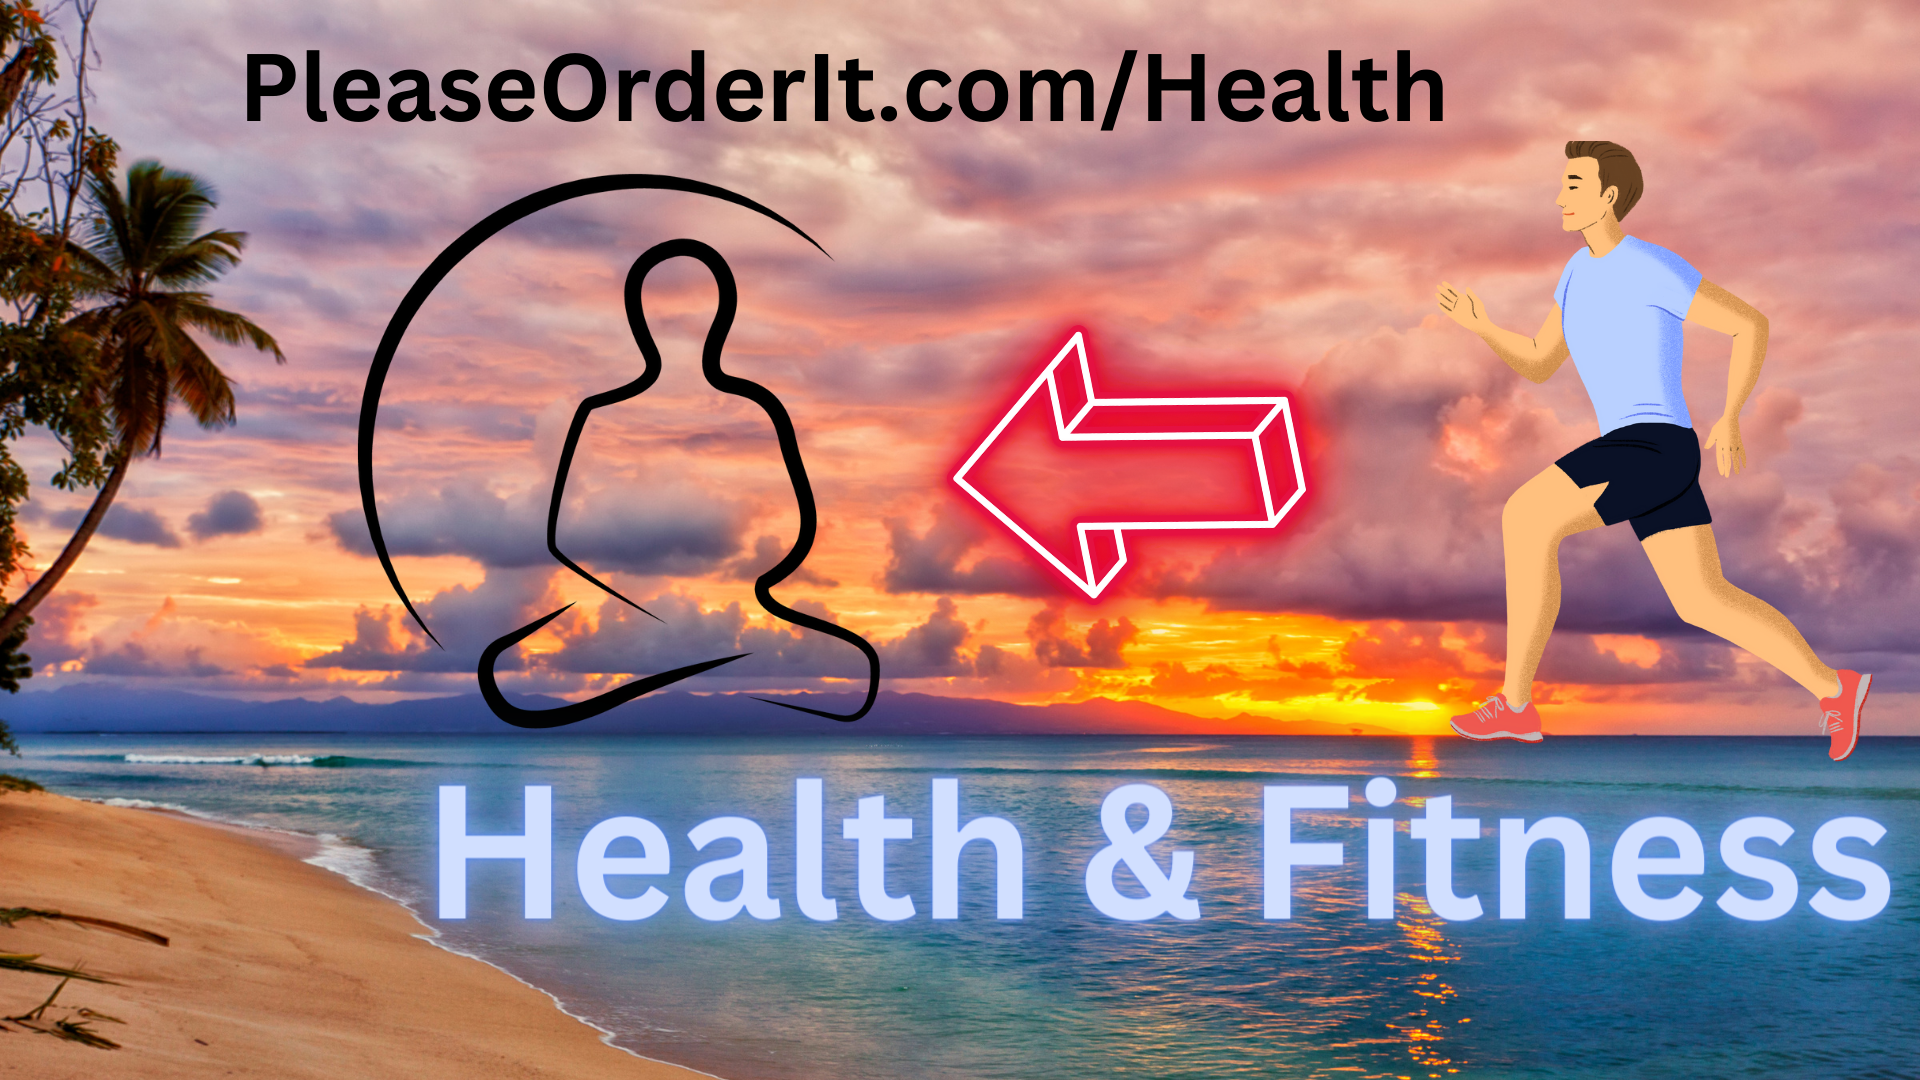 Healthy body is a healthy mind, checkout our new Health and Fitness page